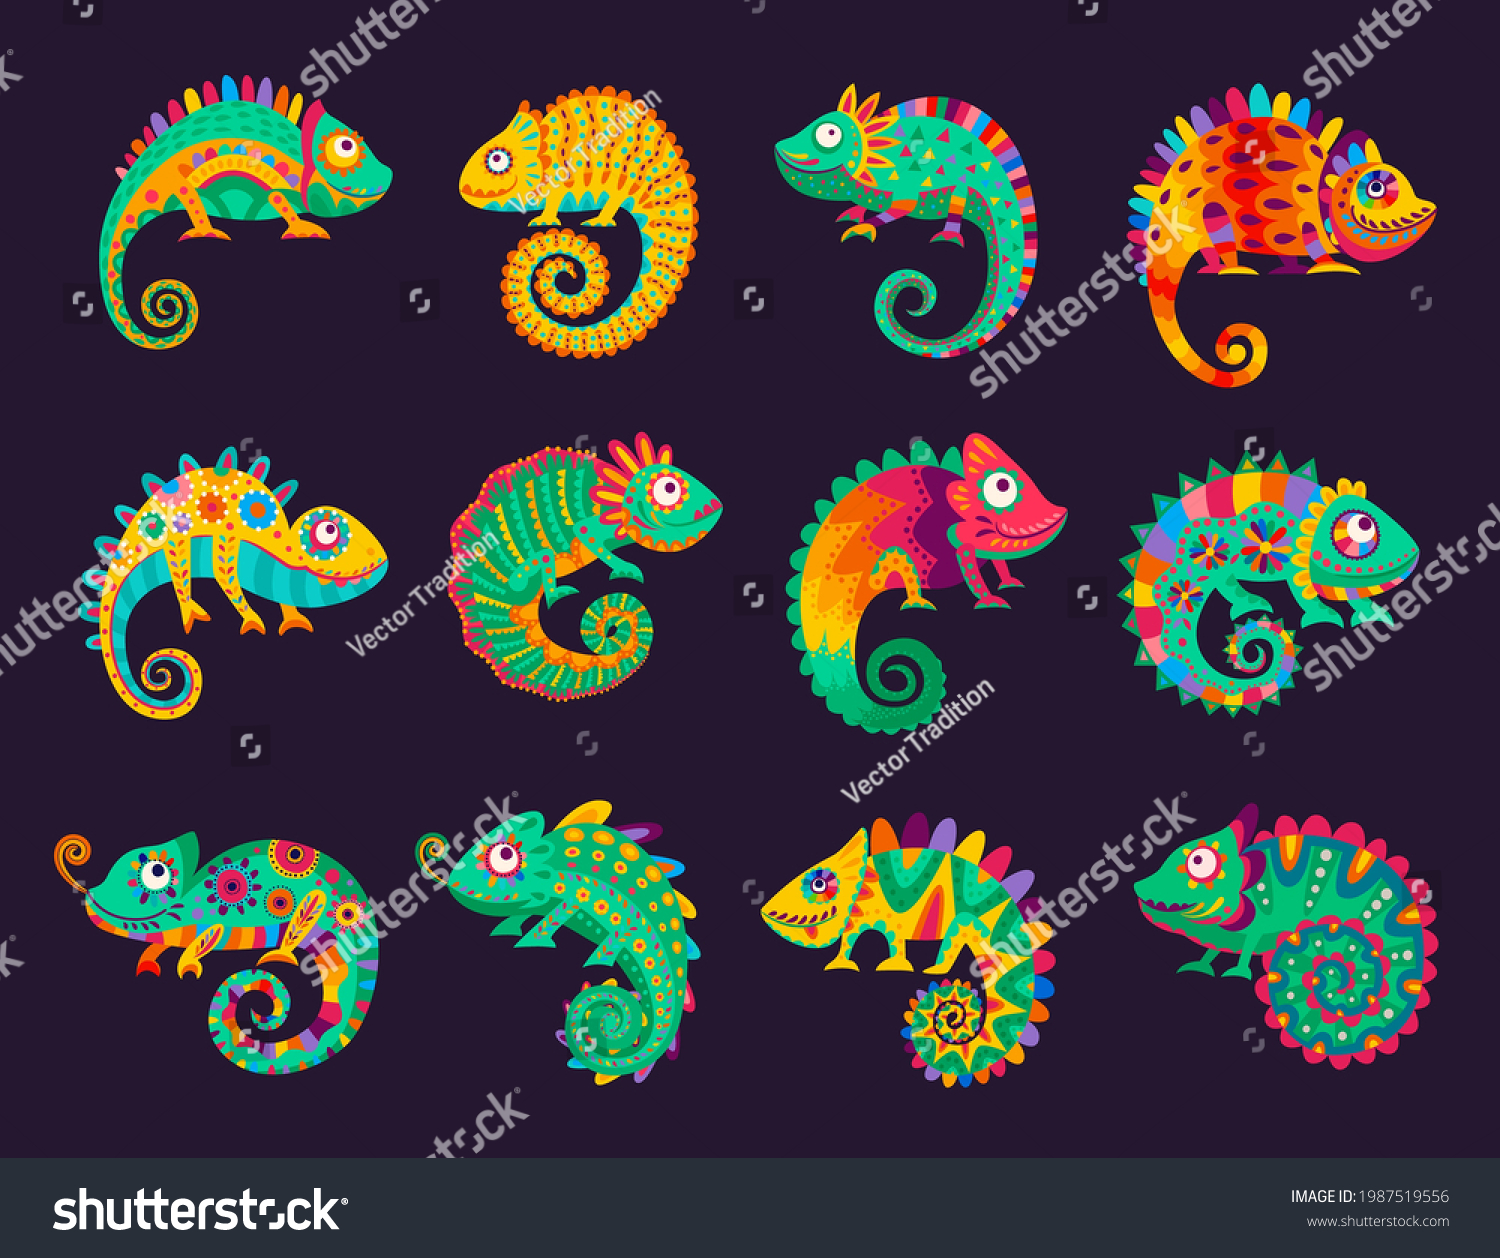 SVG of Cartoon mexican chameleons, vector lizards with ornate colorful skin, long curvy tail, tongue and telescopic eyes. Wild animal, pet, exotic tropical reptile for Cinco de Mayo or Dia de Los Muertos svg